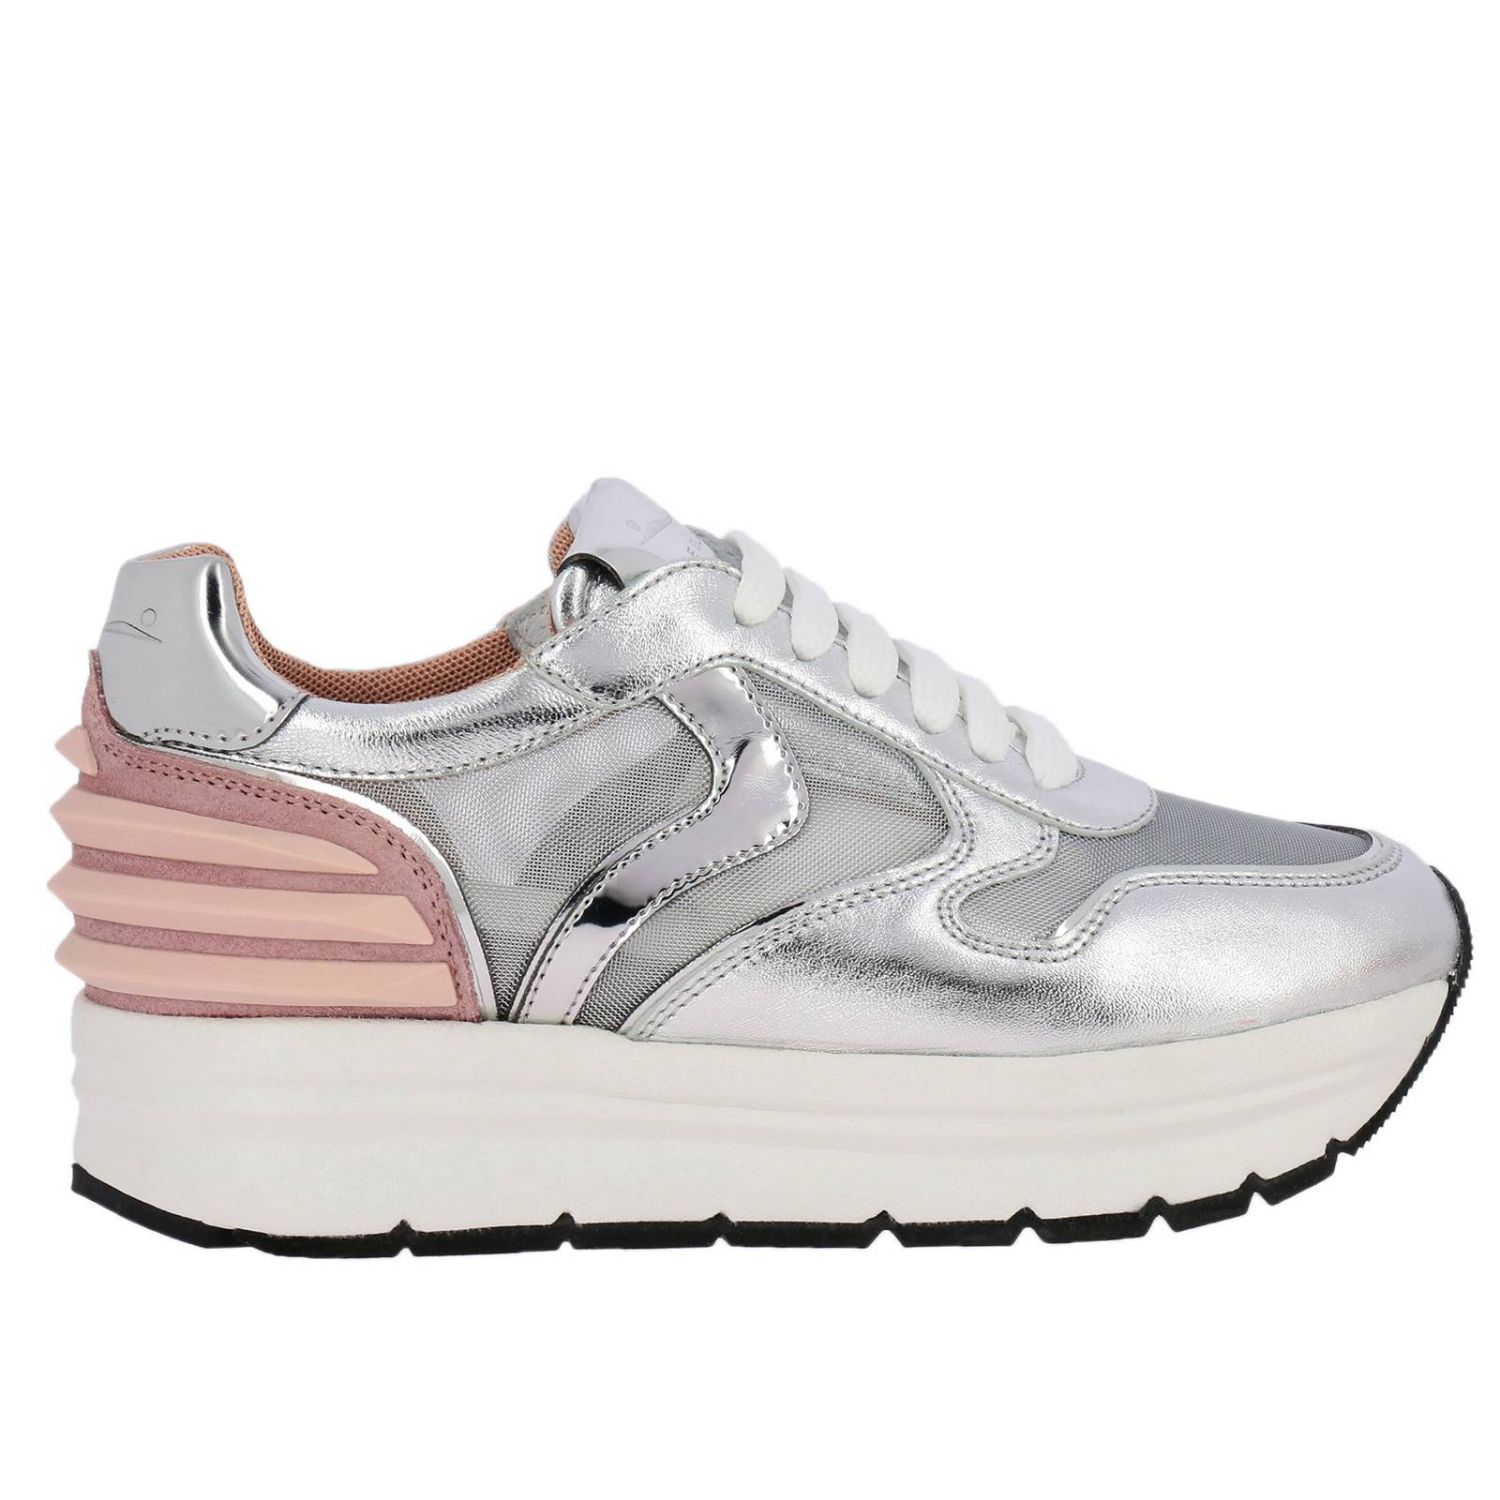 Voile Blanche Outlet: Sneakers women - Silver | Sneakers Voile Blanche ...